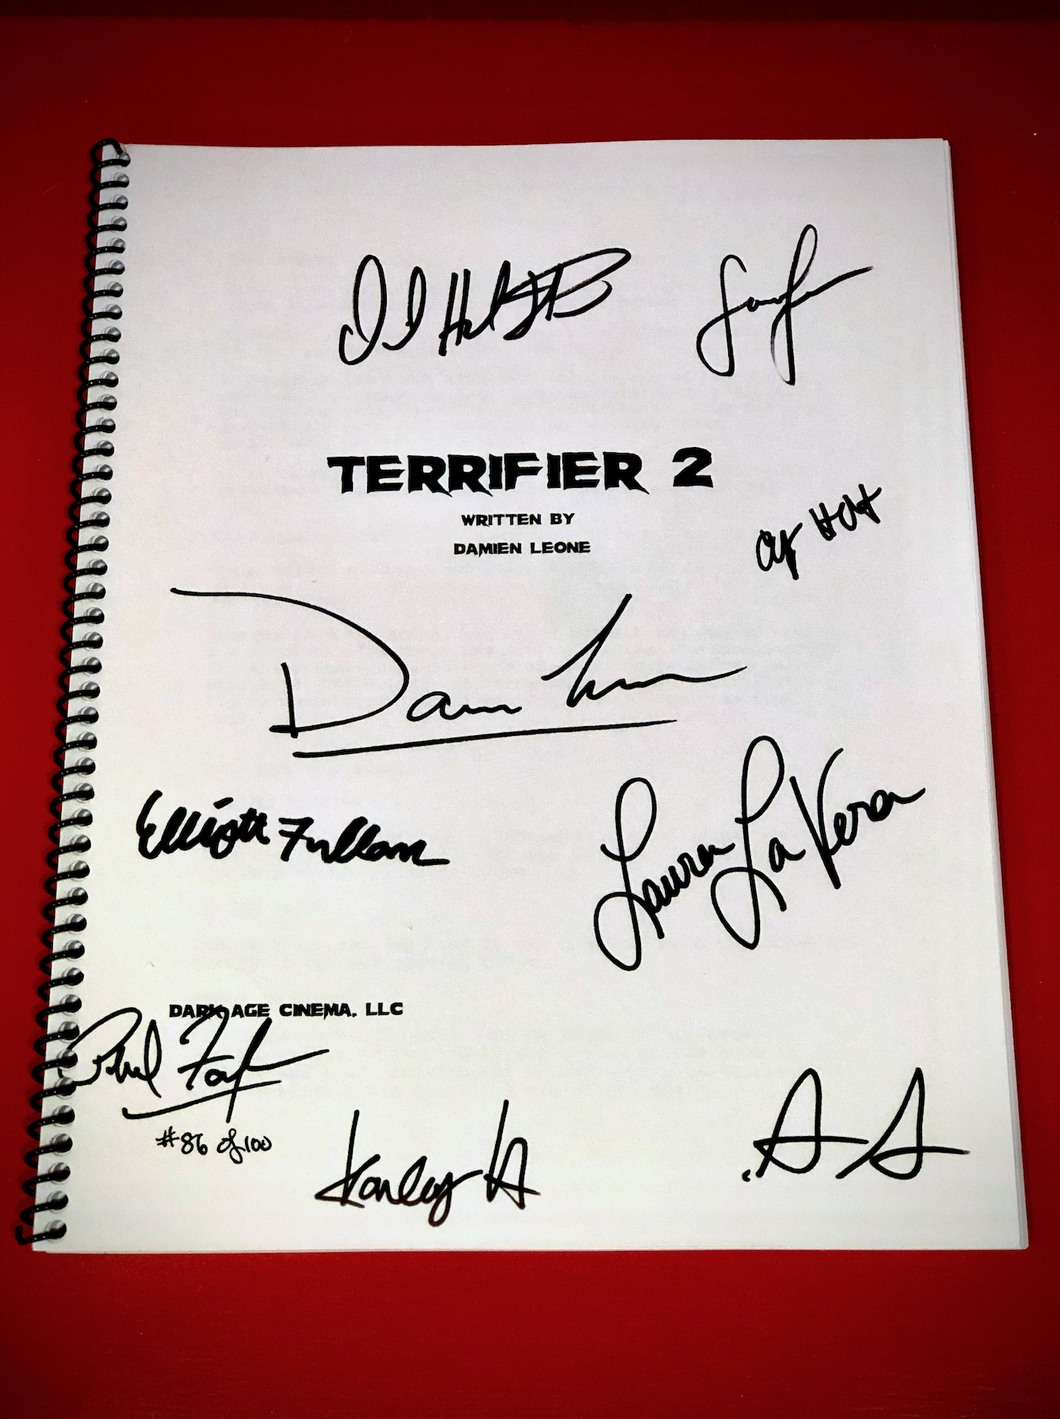 Official Signed Terrifier 2 Script - Signed by Cast, Director and Producers Very Limited Supply